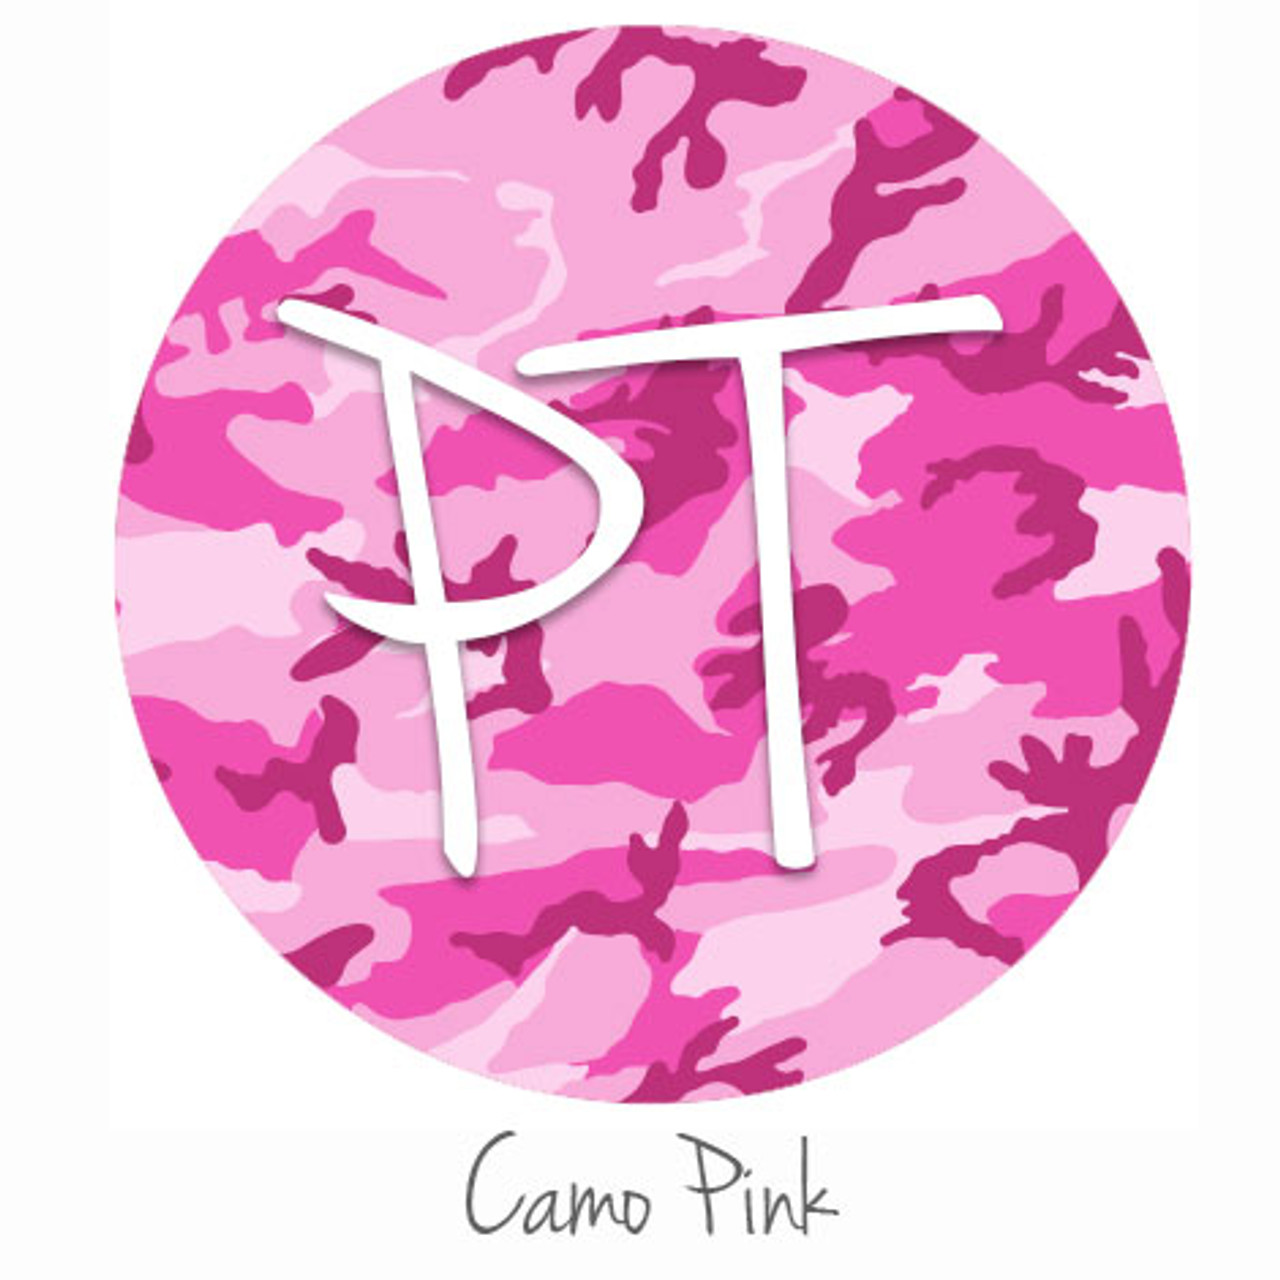 12x12 Patterned Heat Transfer Vinyl - Camo - Pink - Expressions